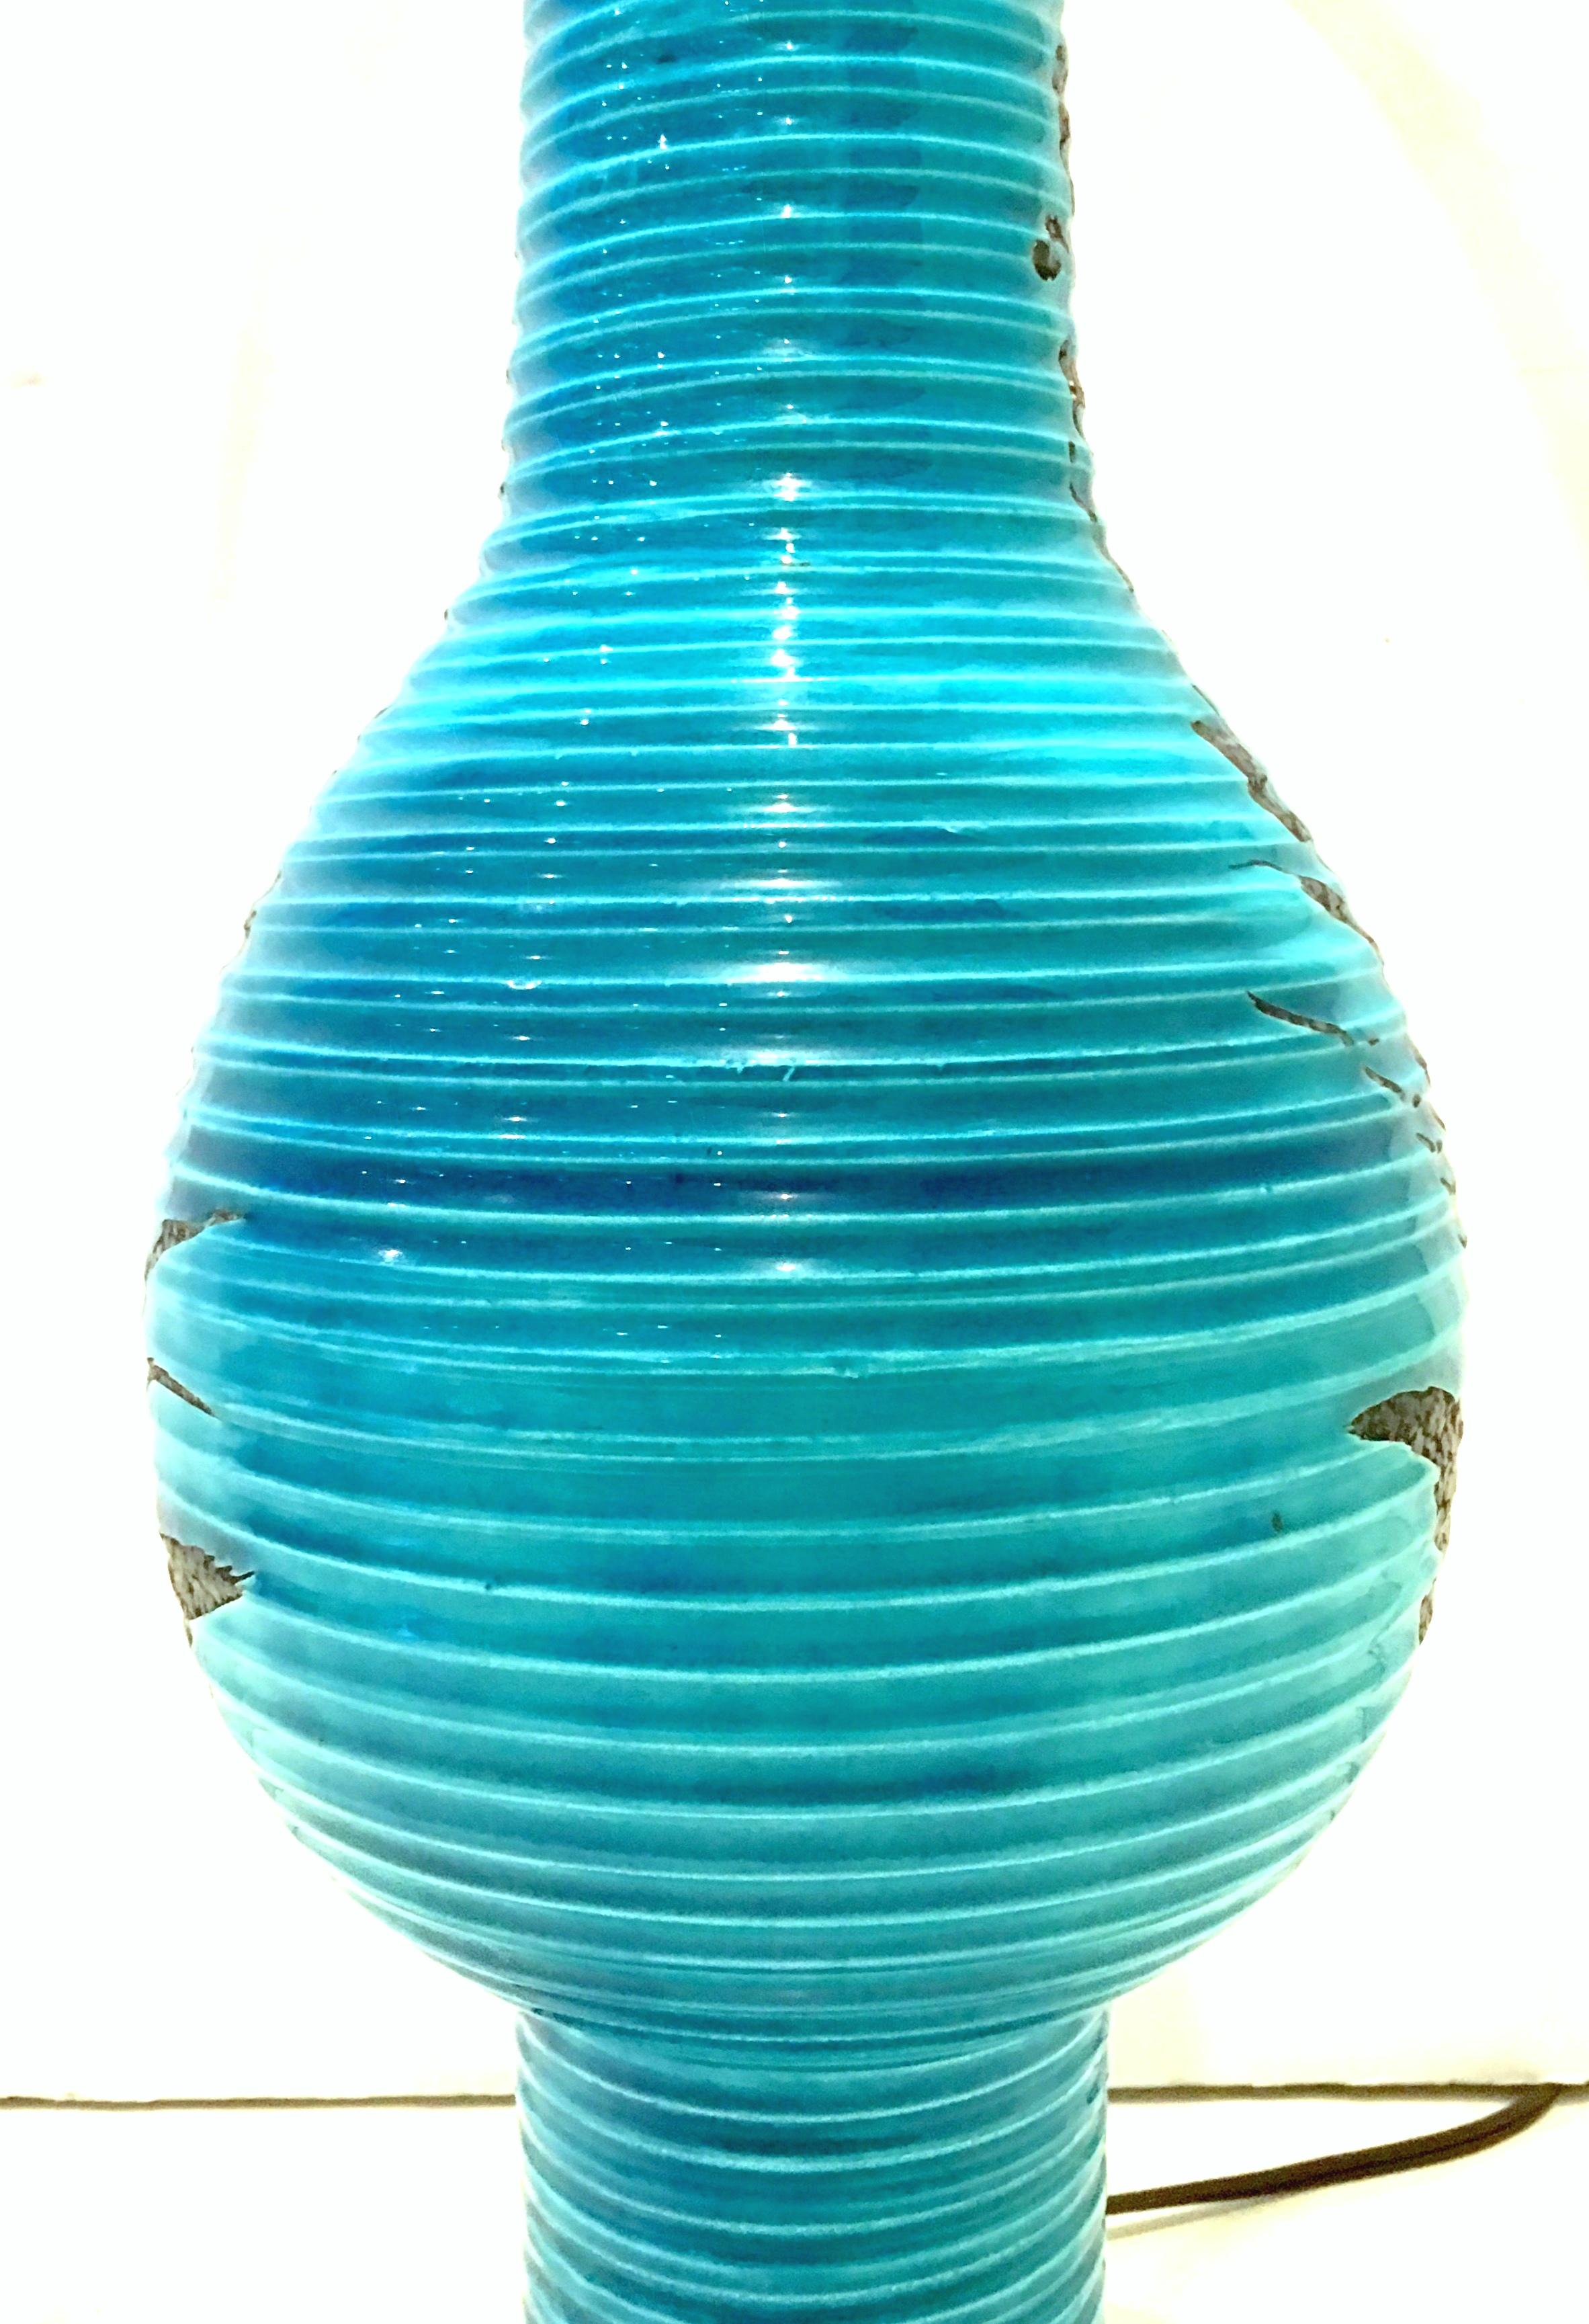 1960s Italian Cerulean Blue and Black Ceramic Glaze Pottery Lamp by, Bitossi For Sale 4